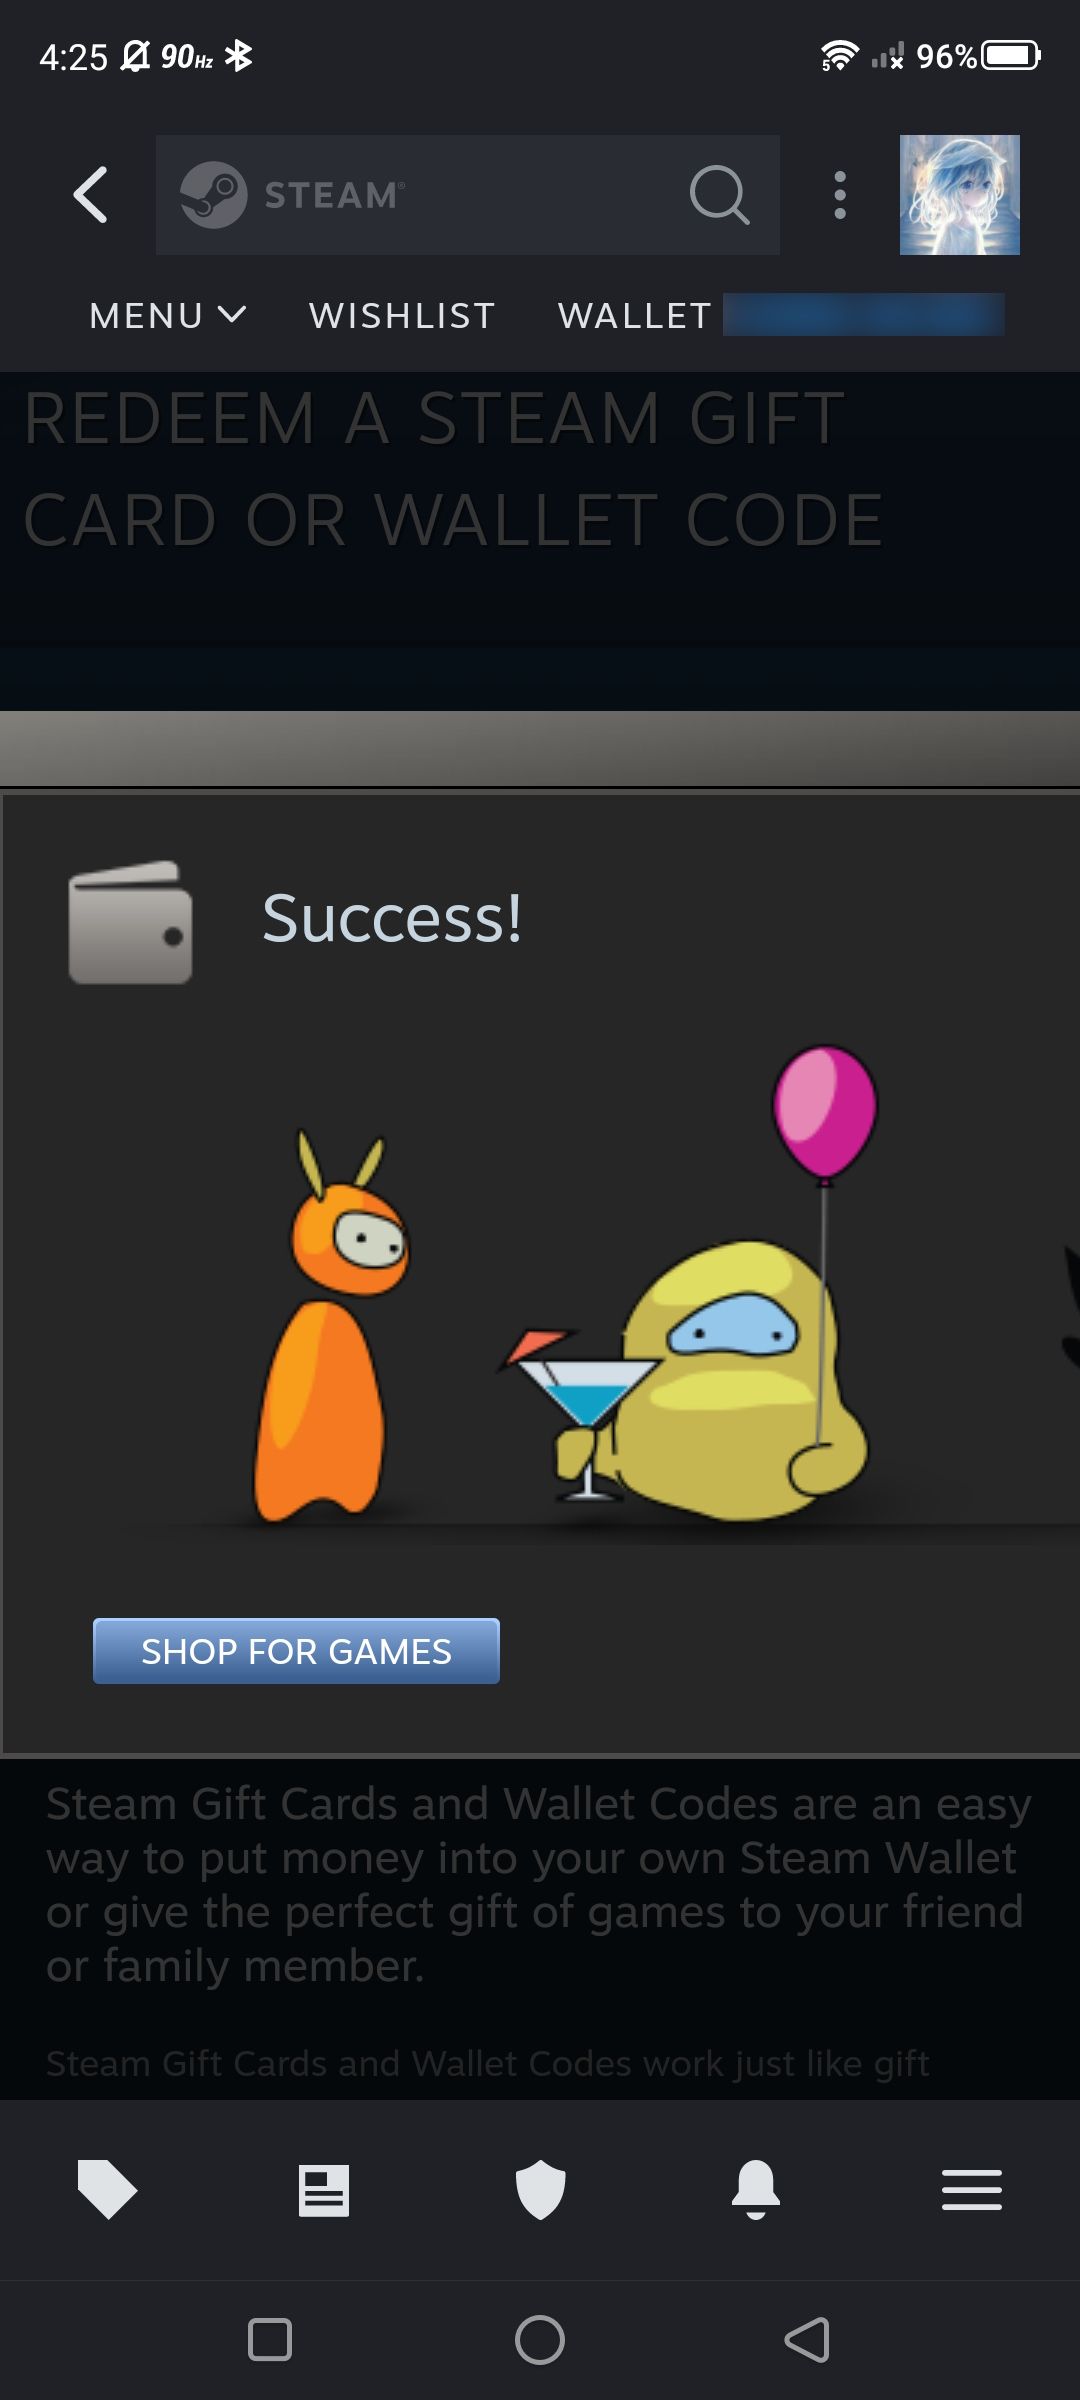 success pop up window after redeeming a steam key in the steam mobile app